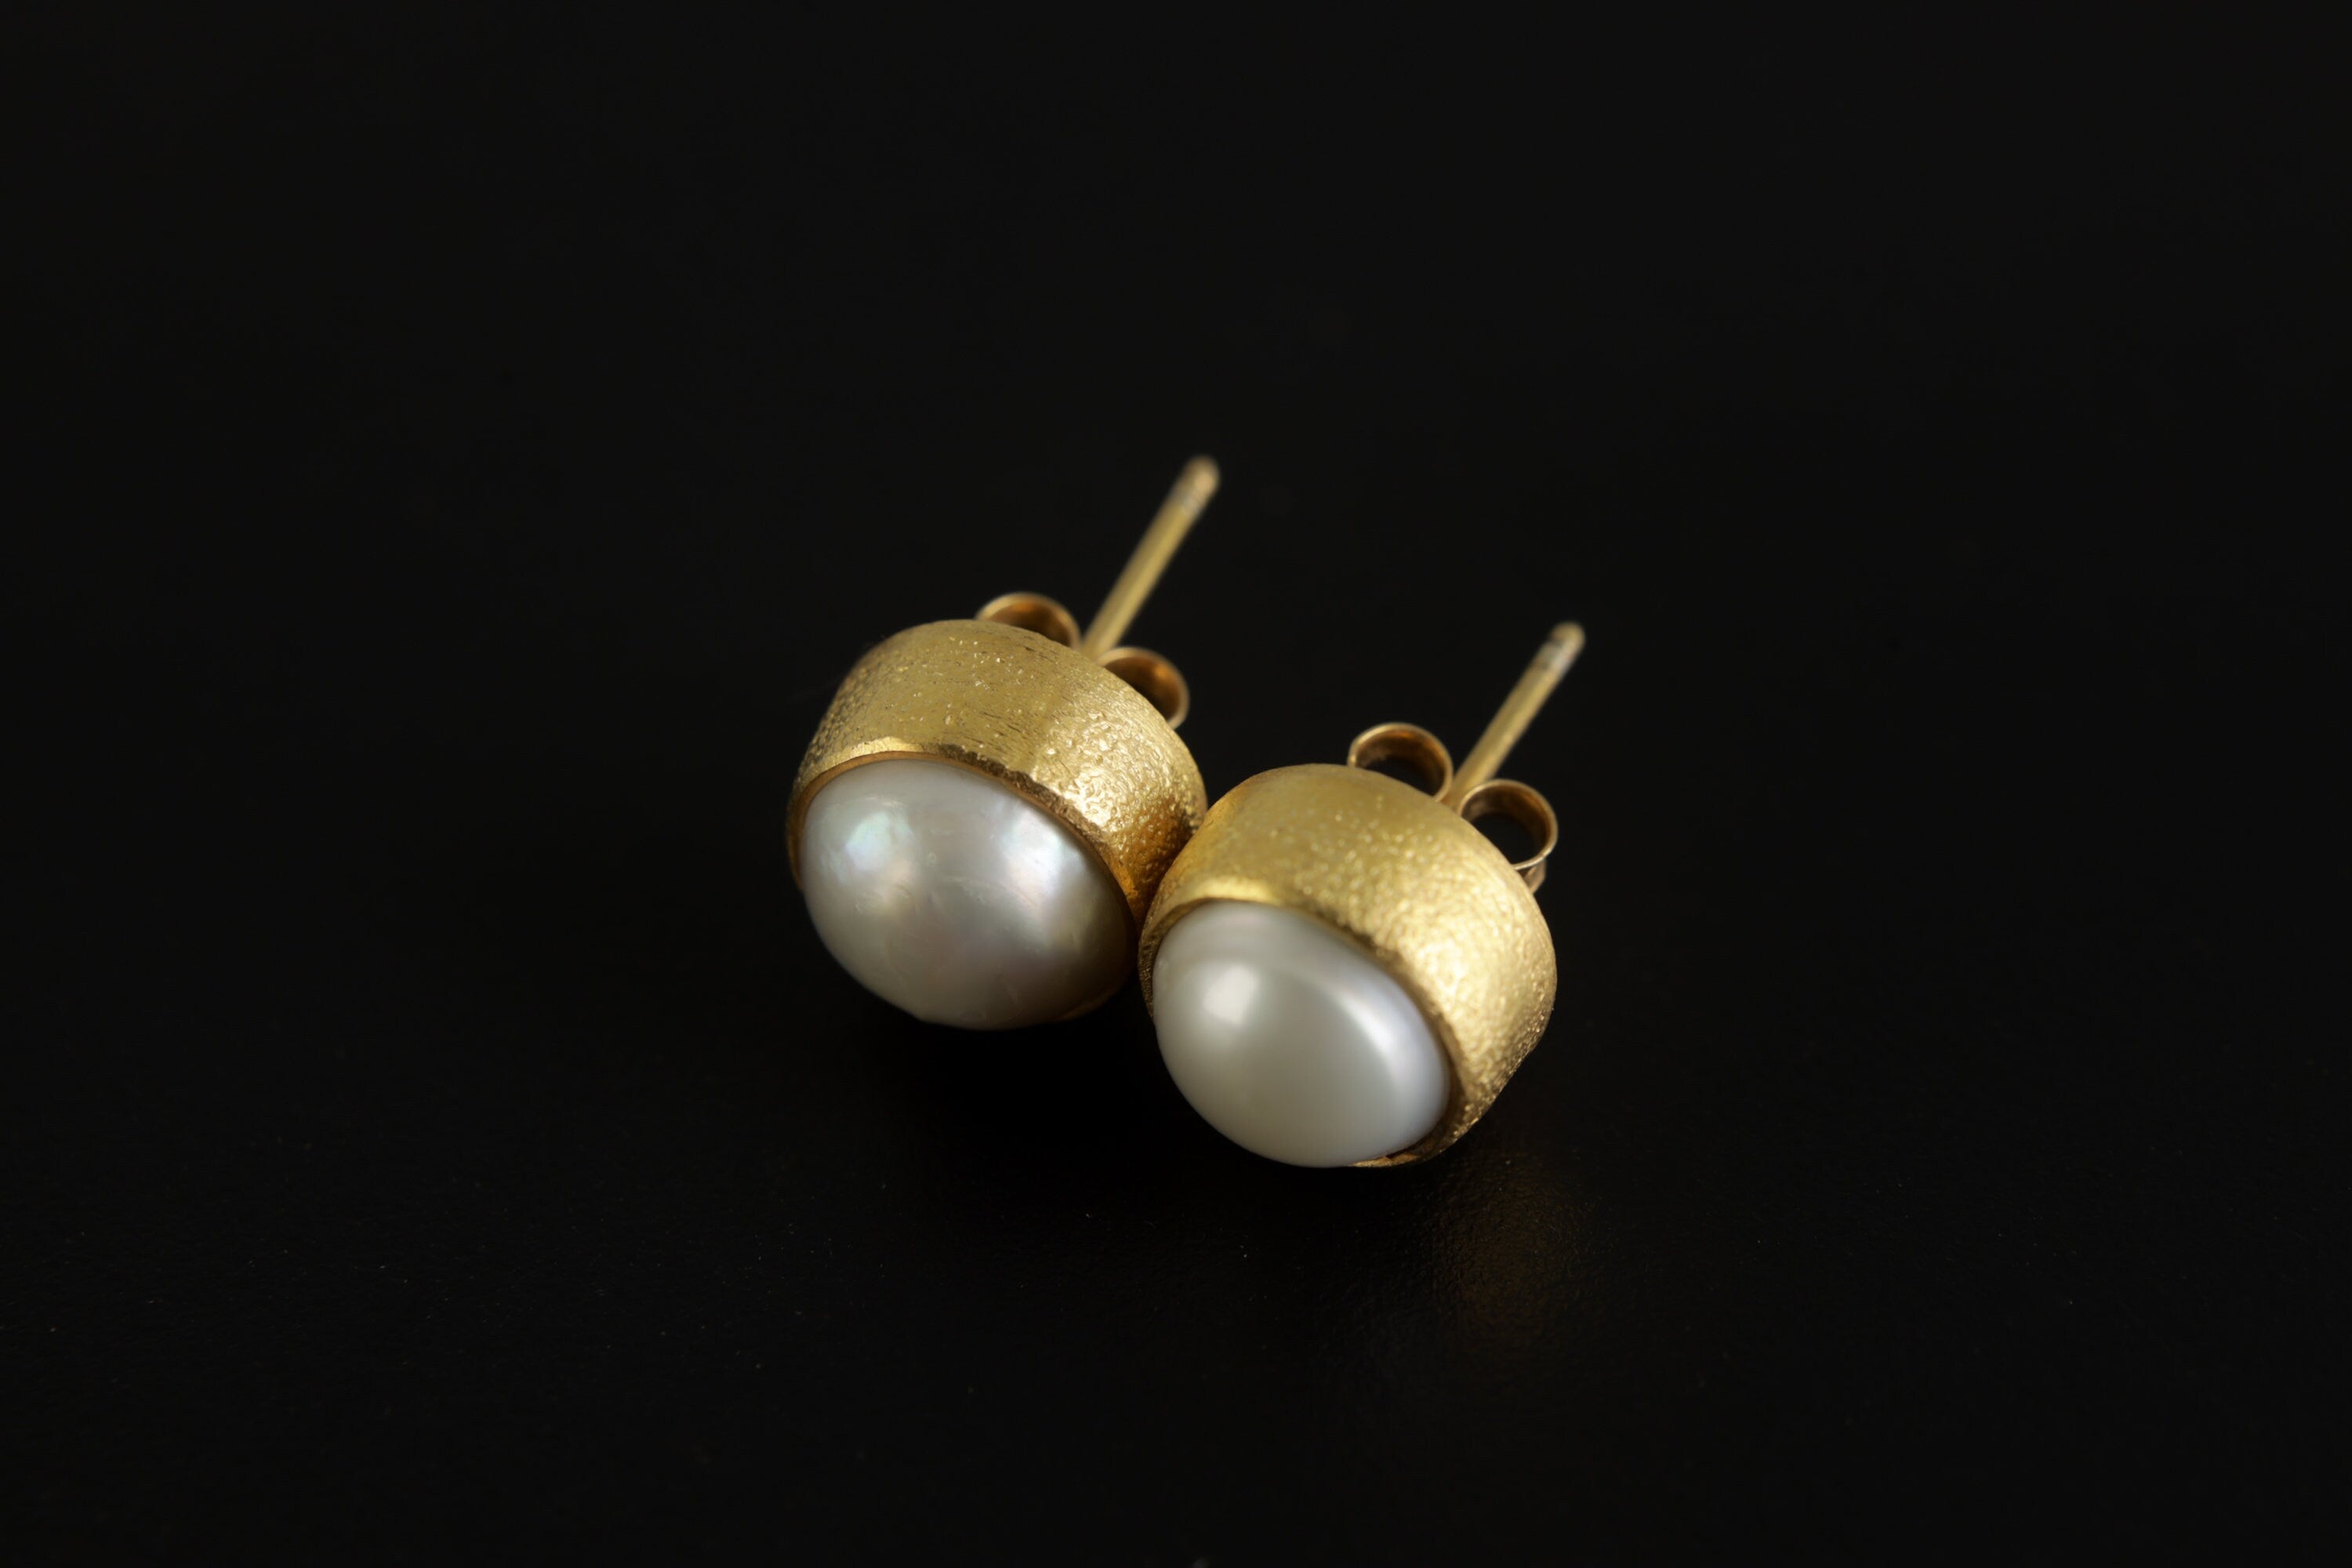 Ocean's Whisper: Large South Sea Pearl - Sand Textured Gold Plated Sterling Silver -Stud Earrings